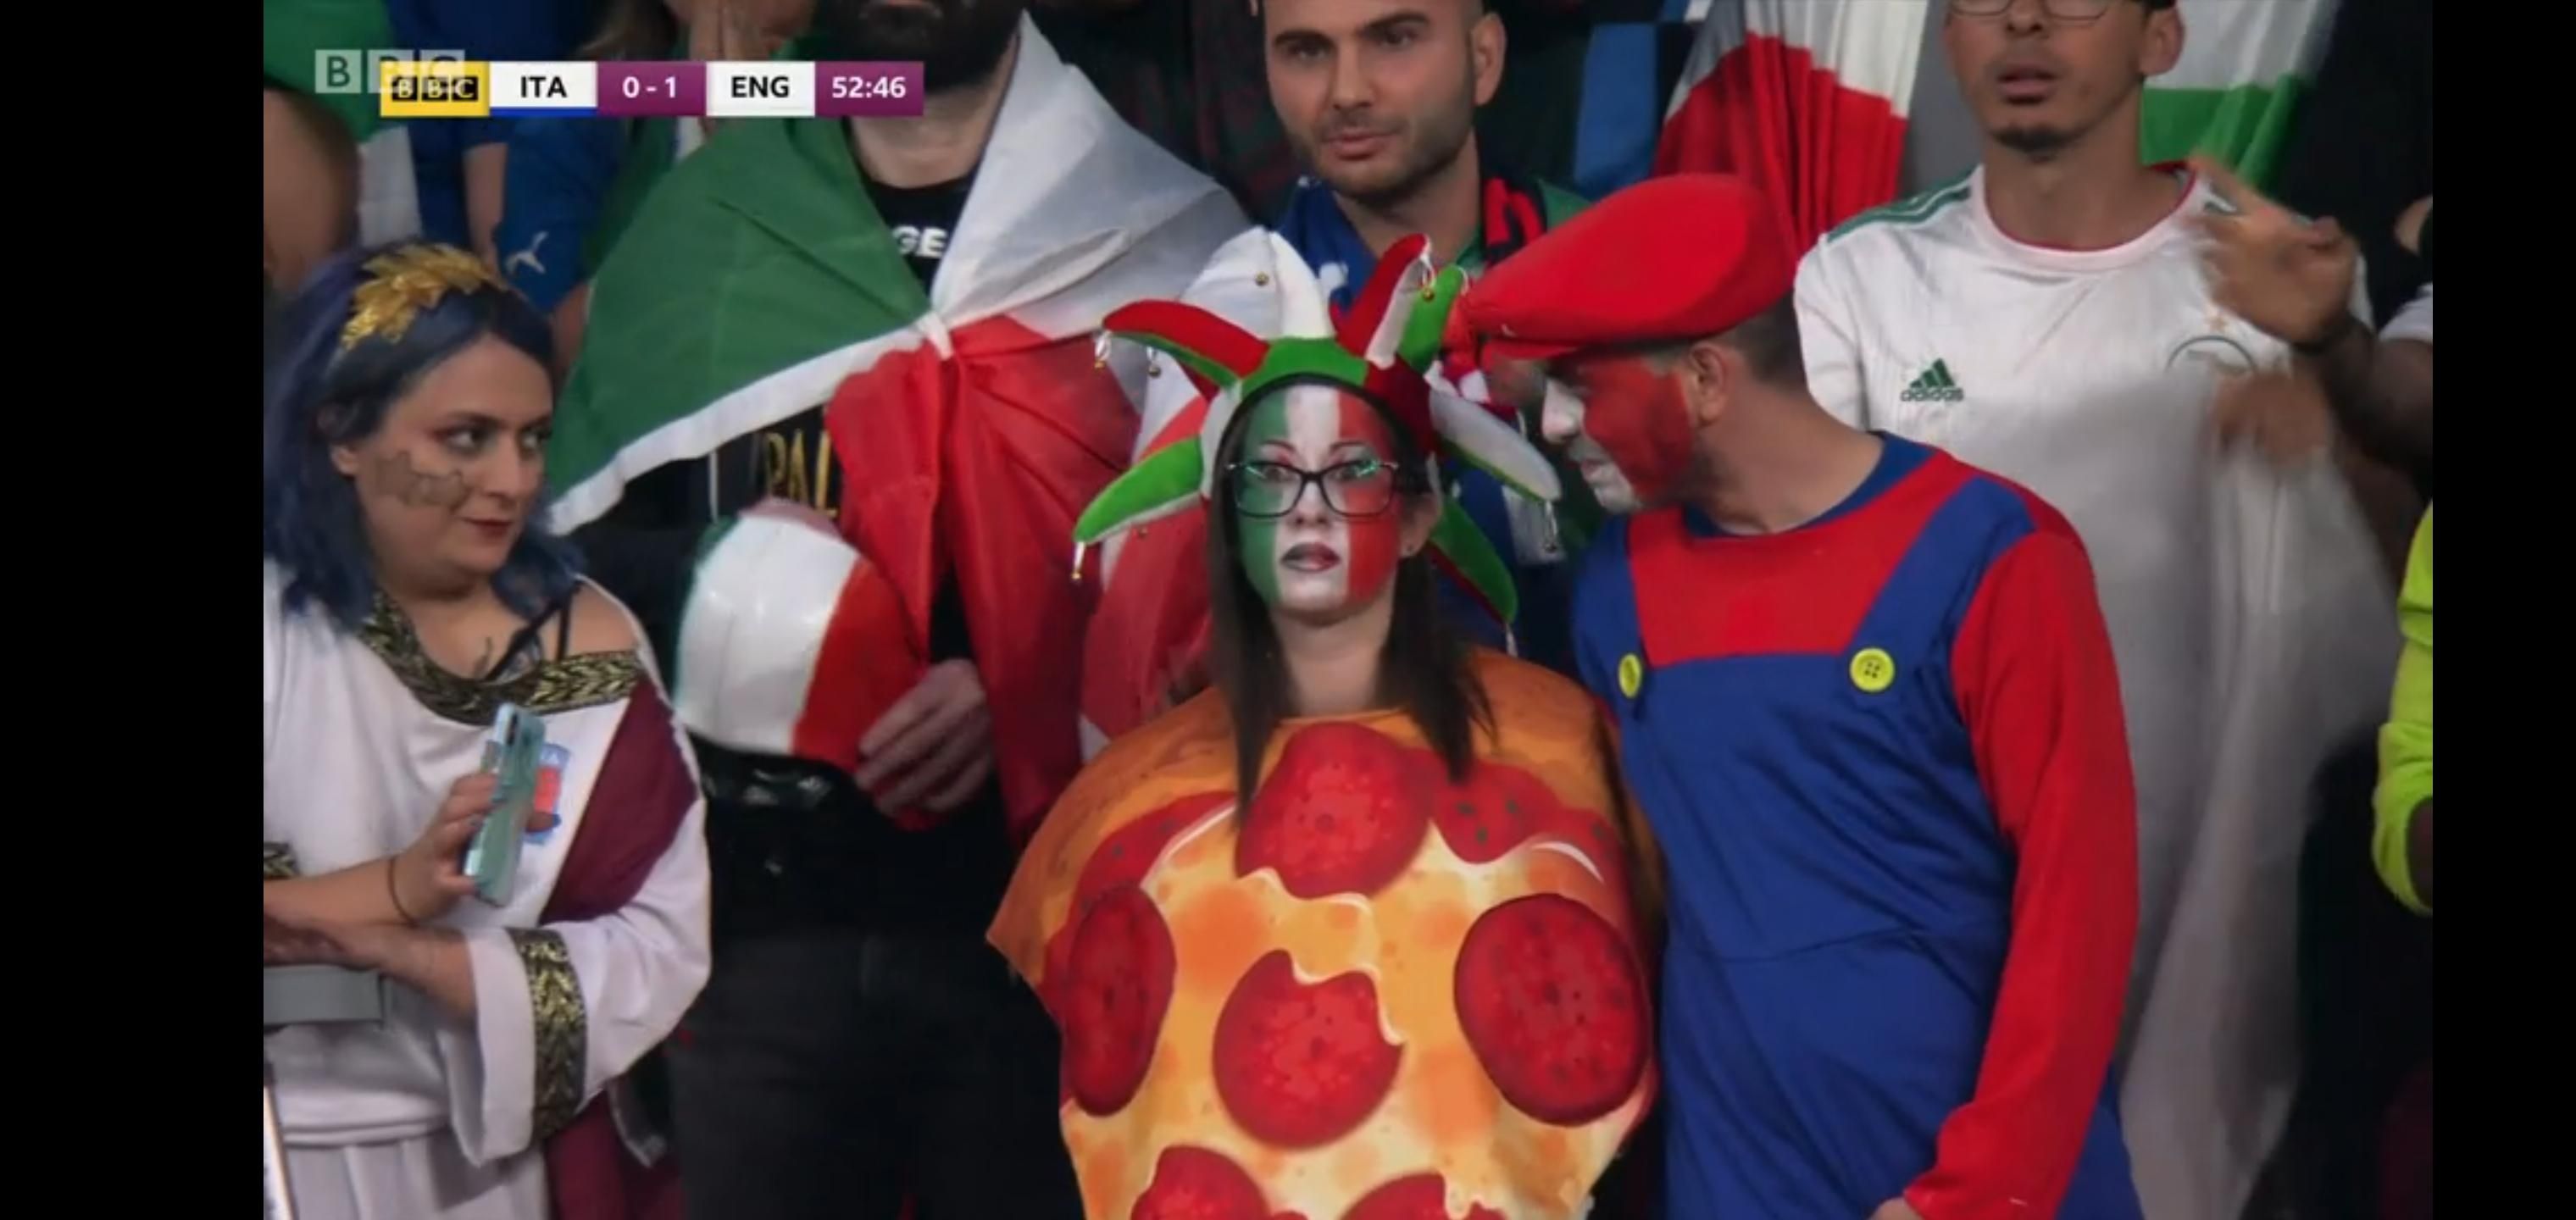 That sudden realisation your an anthropomorphic pizza surrounded by hungry Italians...